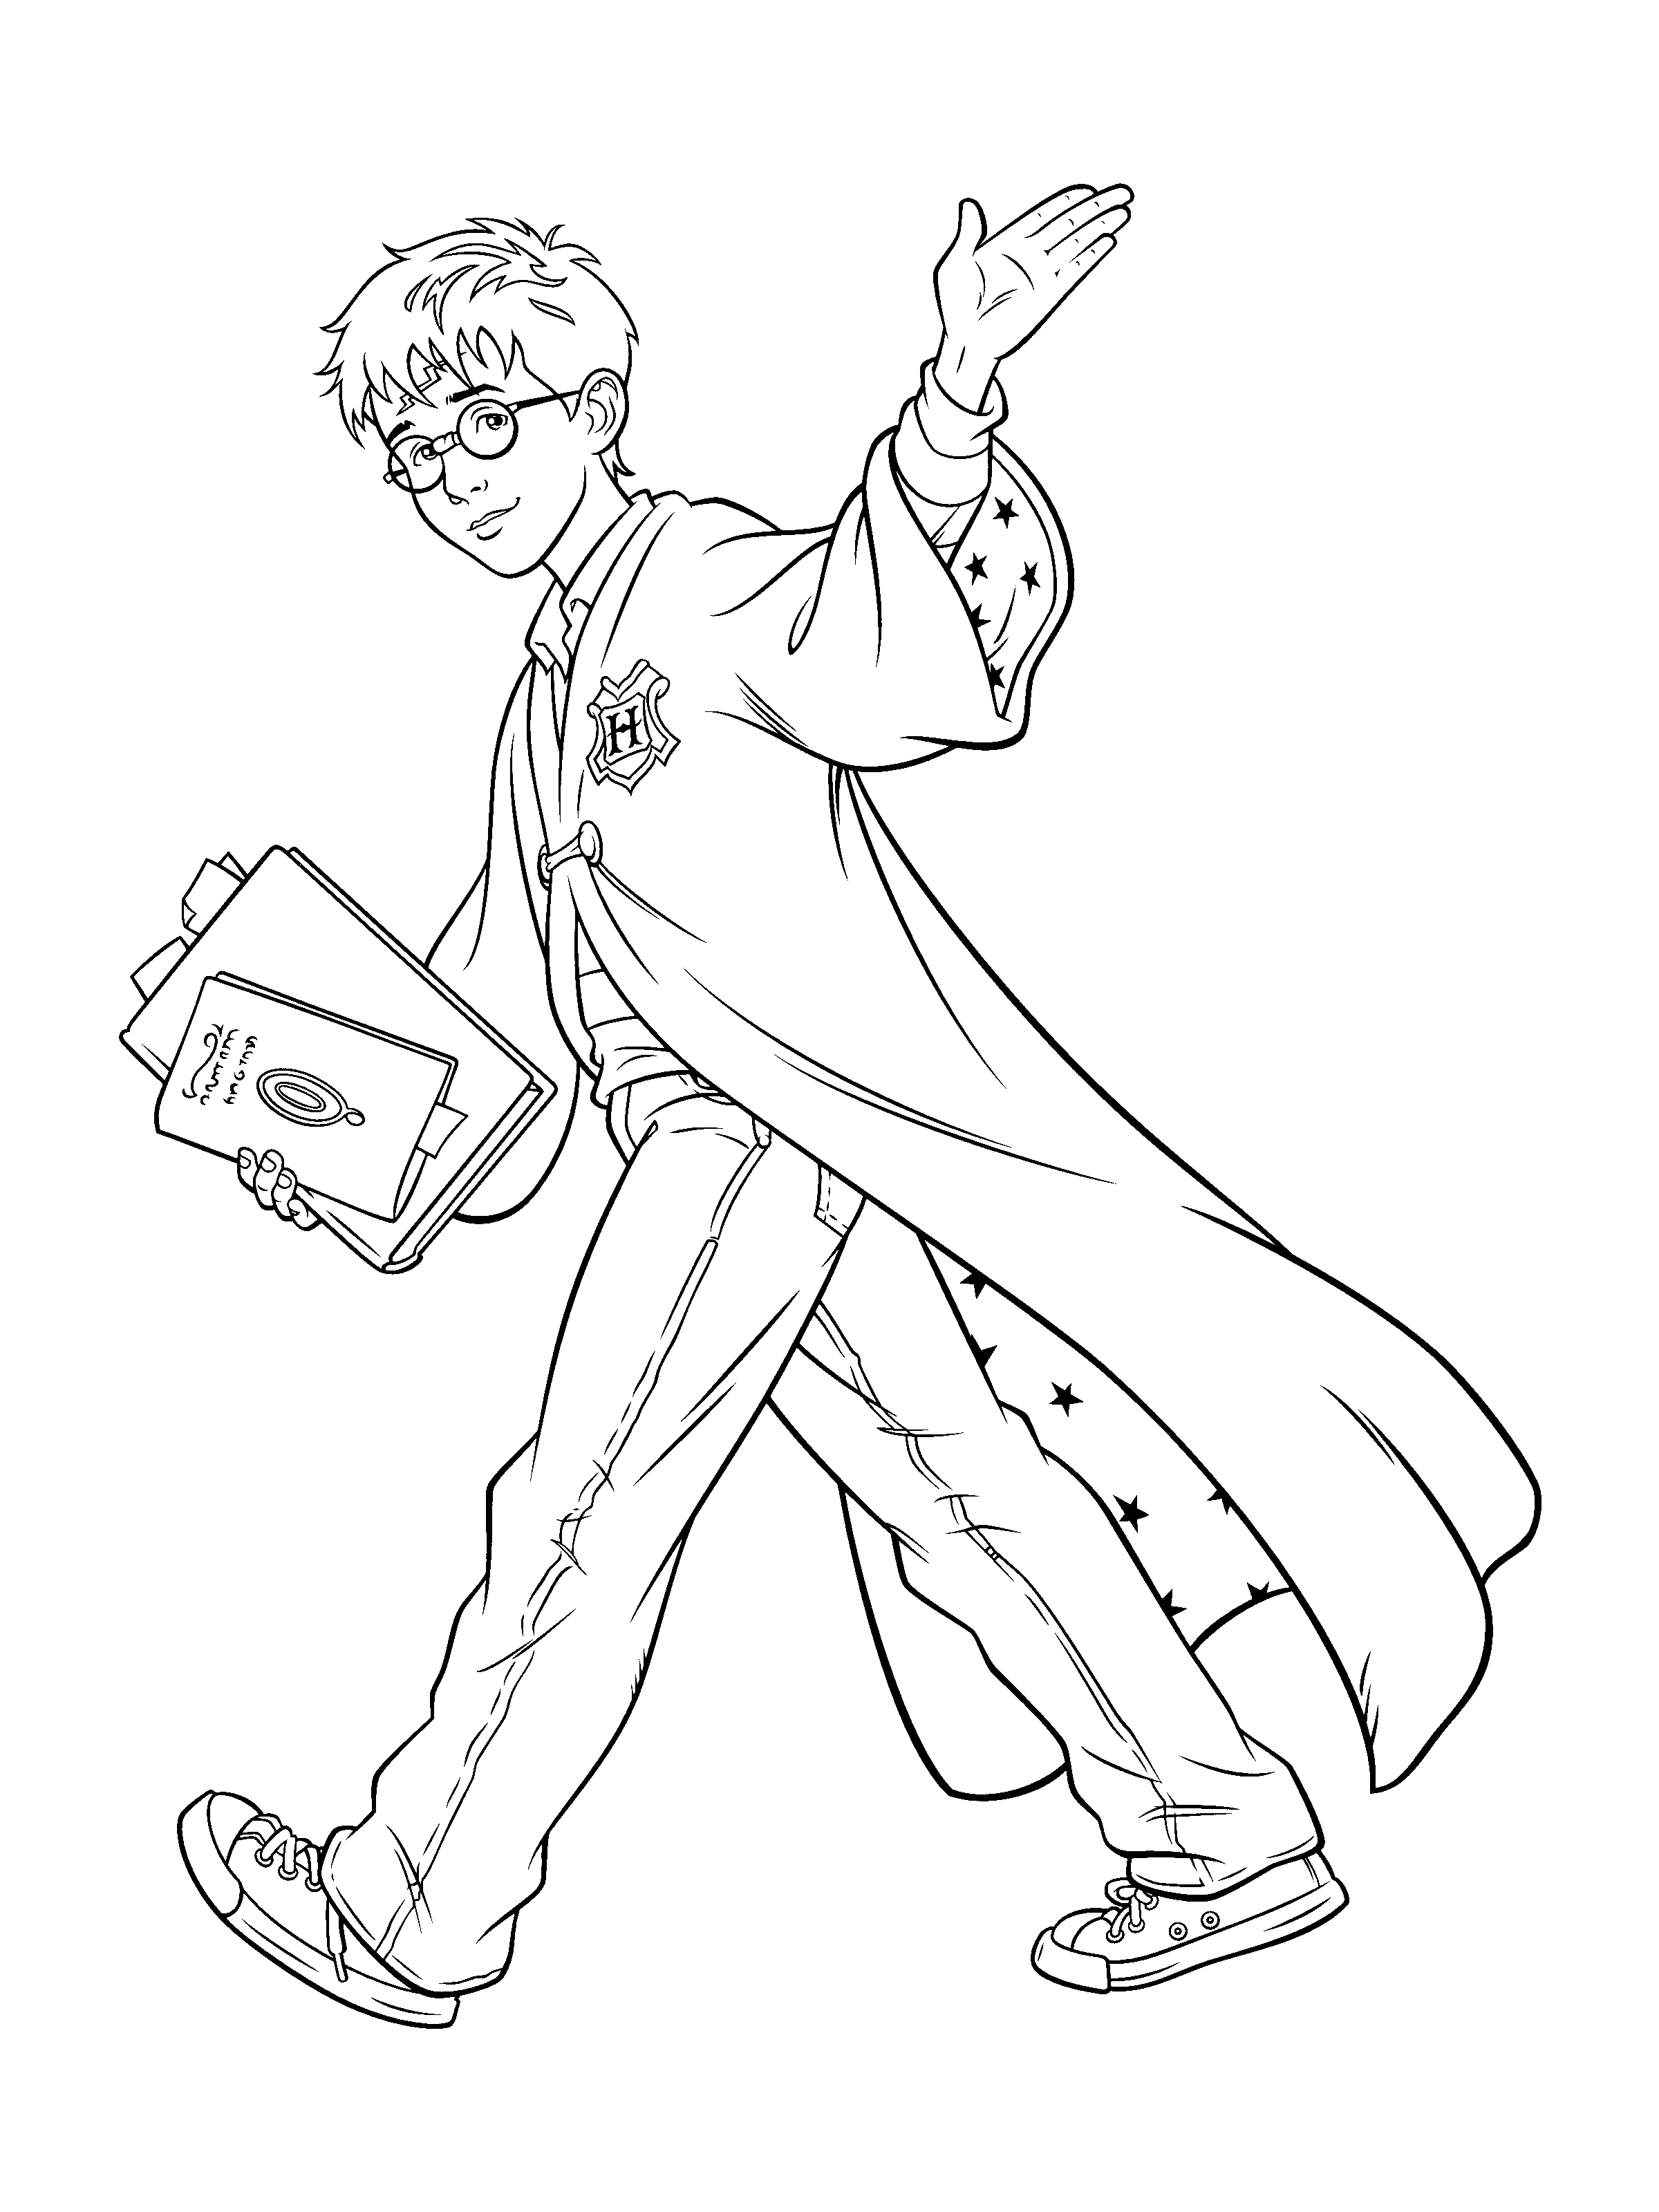 Harry Potter Harry On His Broom coloring page